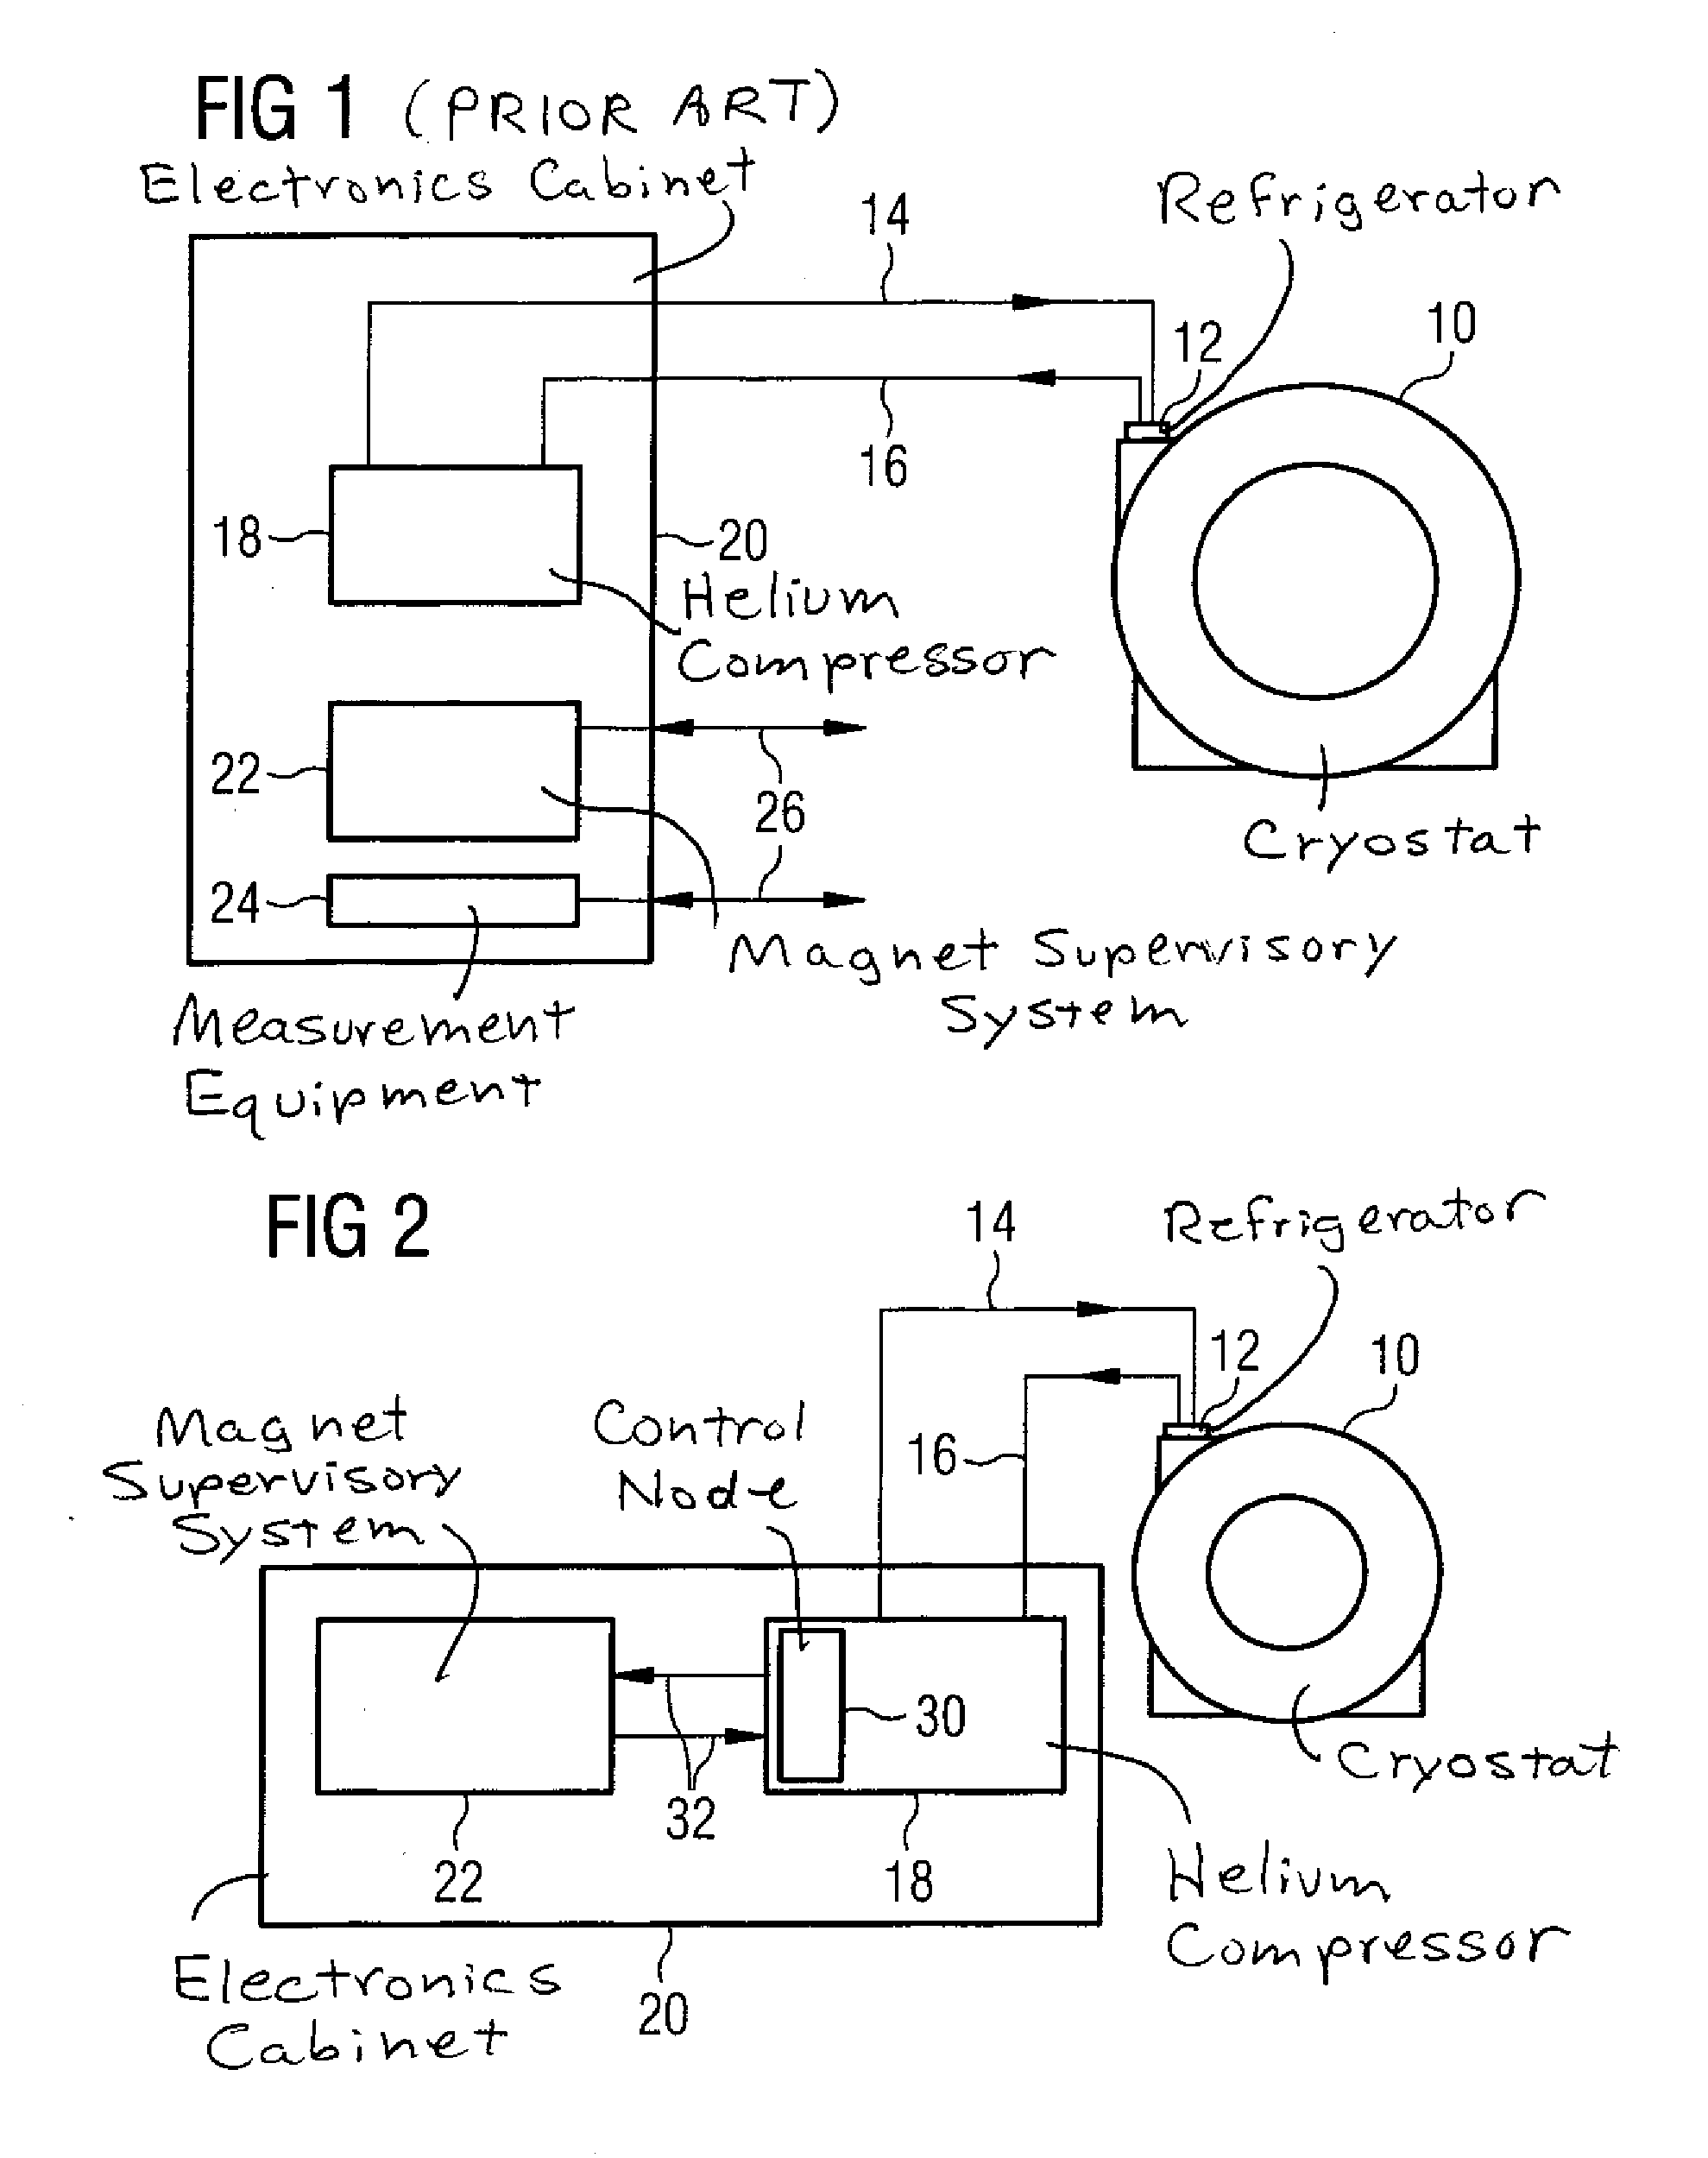 Helium compressor with control for reduced power consumption